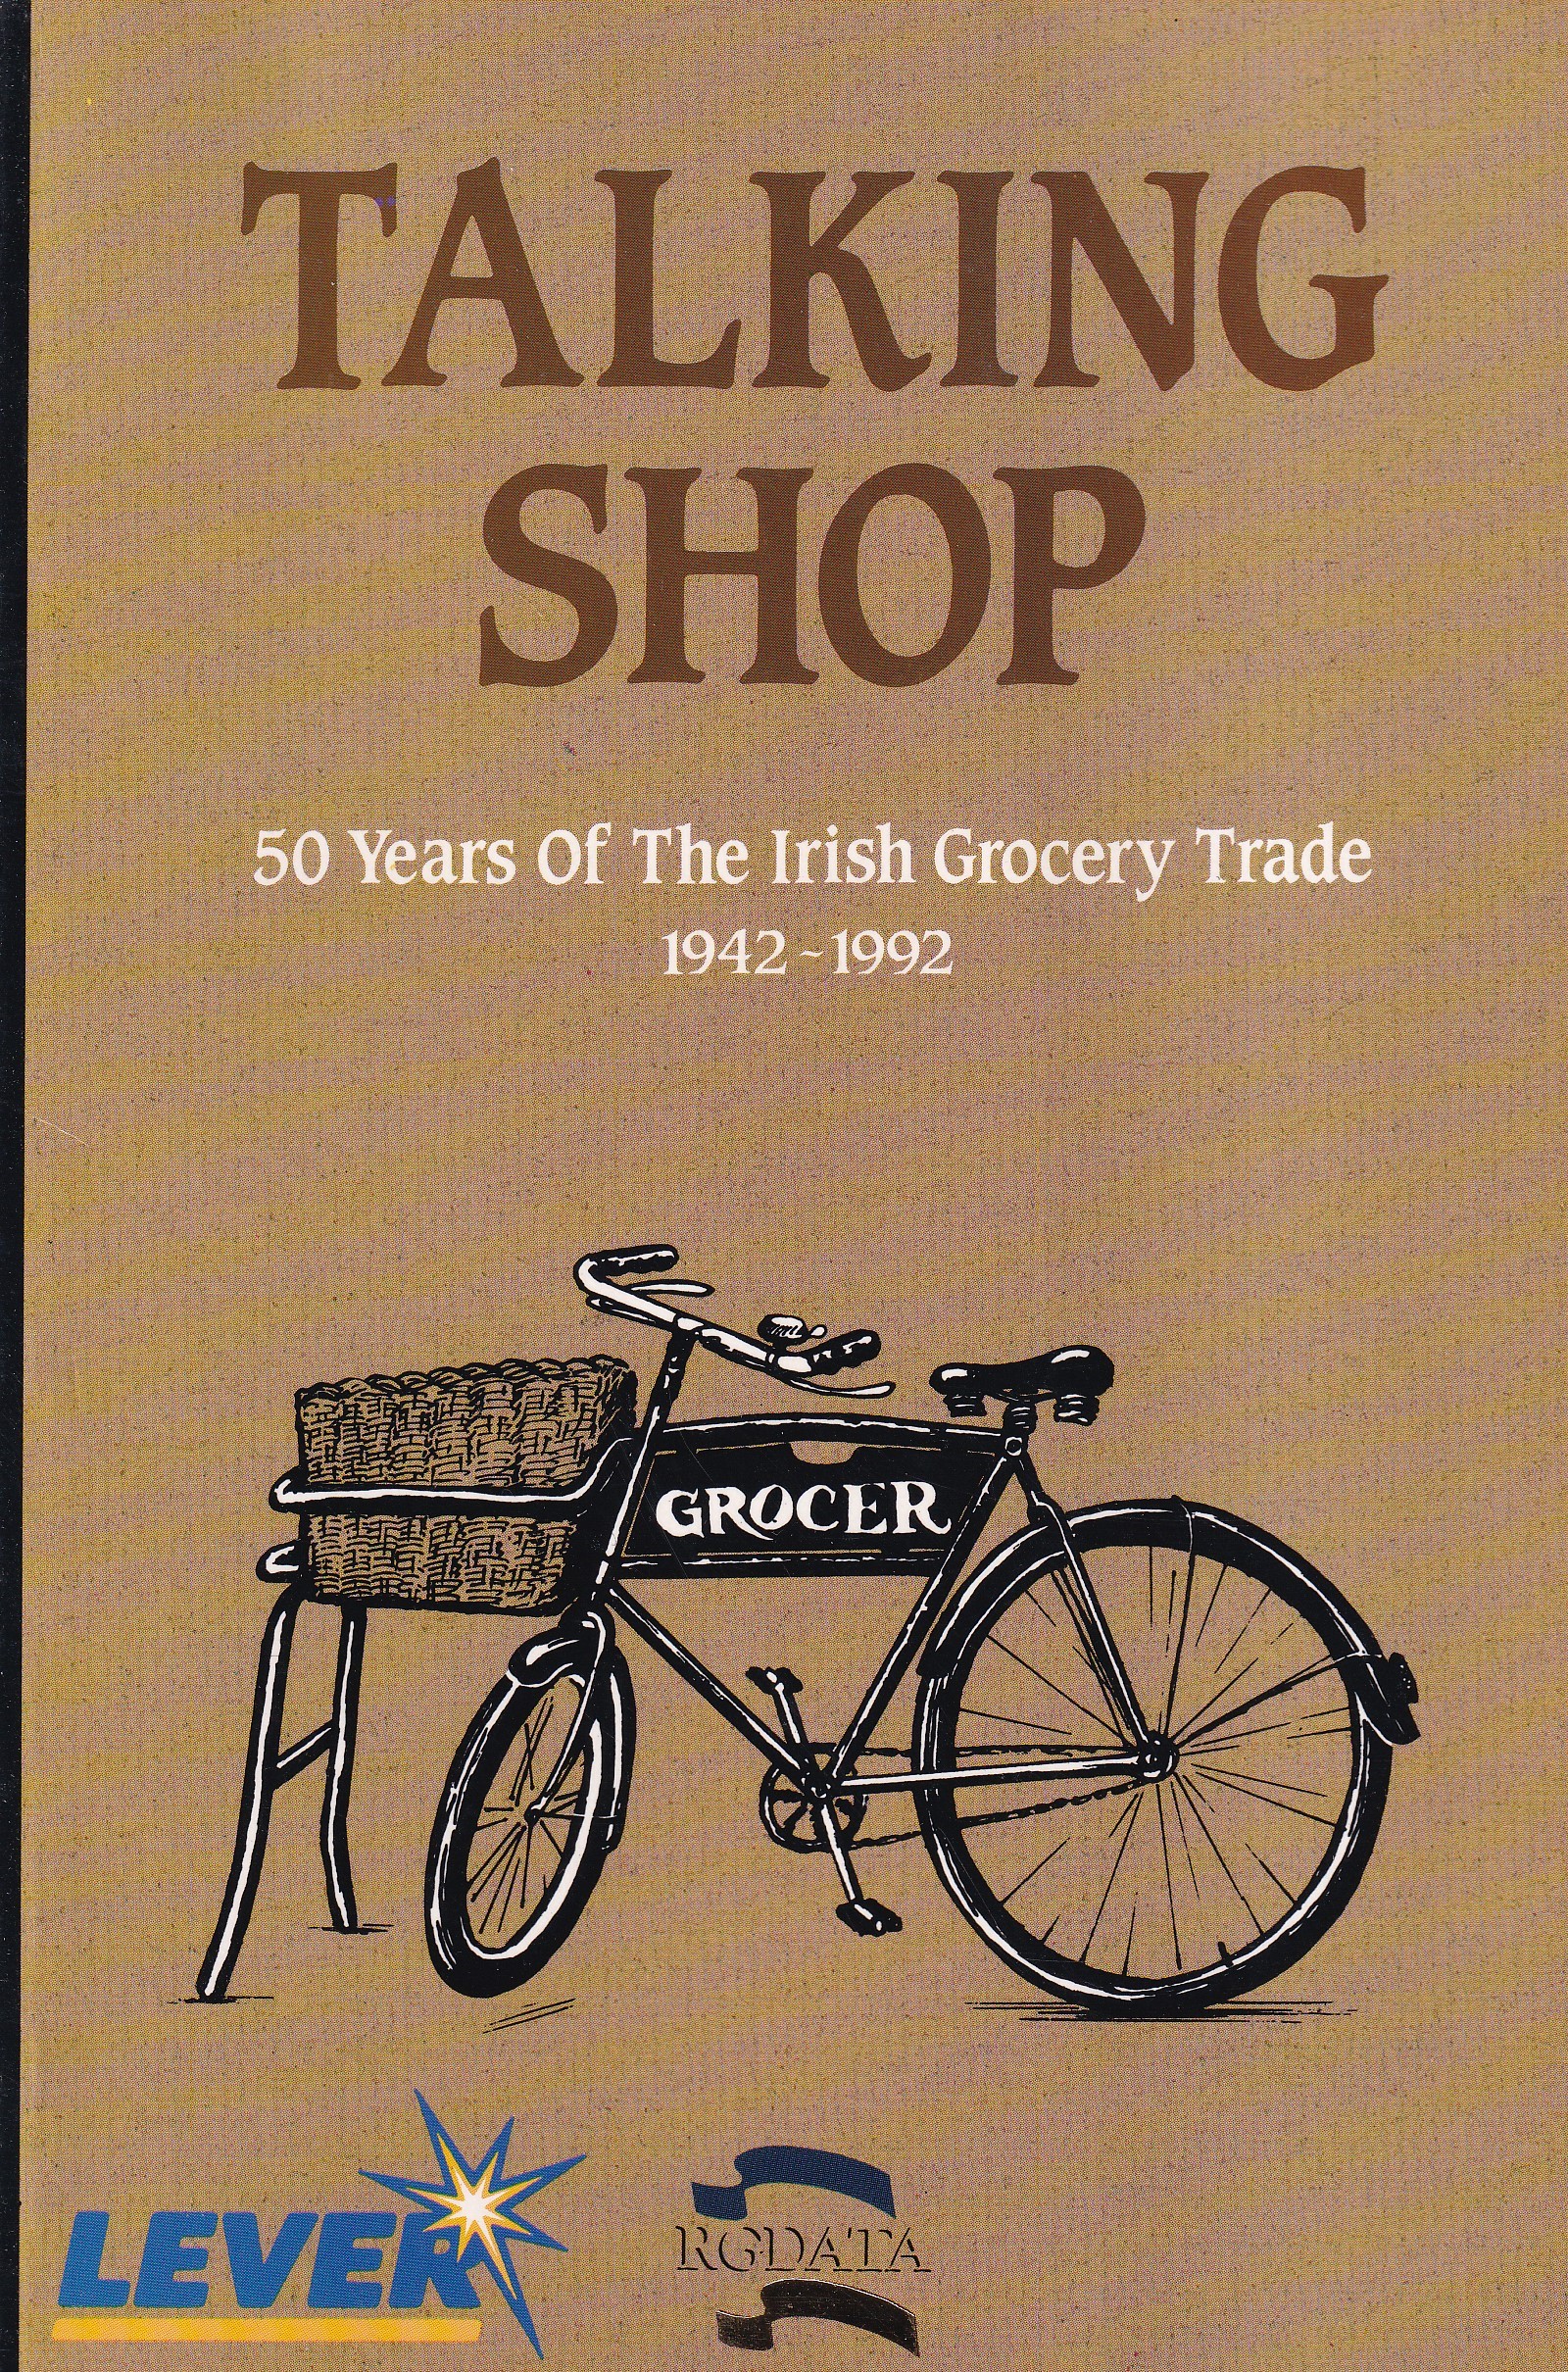 Talking Shop: 50 Years of the Irish Grocery Trade 1942-1992 by Shane Molloy